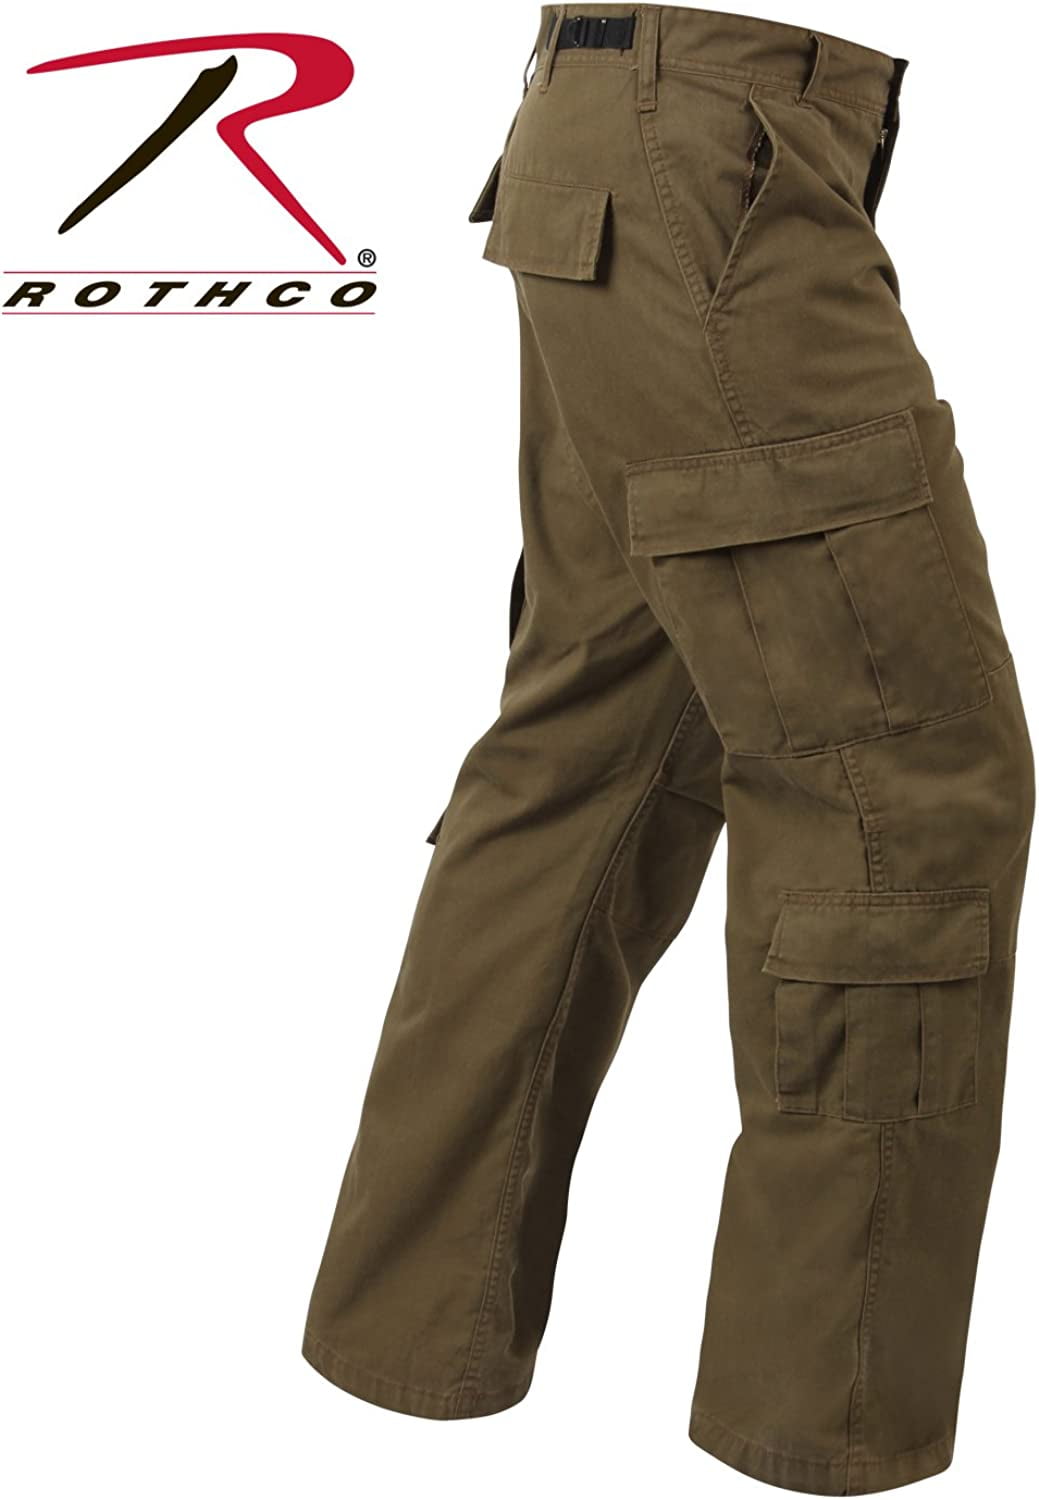 Rothco Vintage Paratrooper Cargo Fatigue Pants,Russet Brown